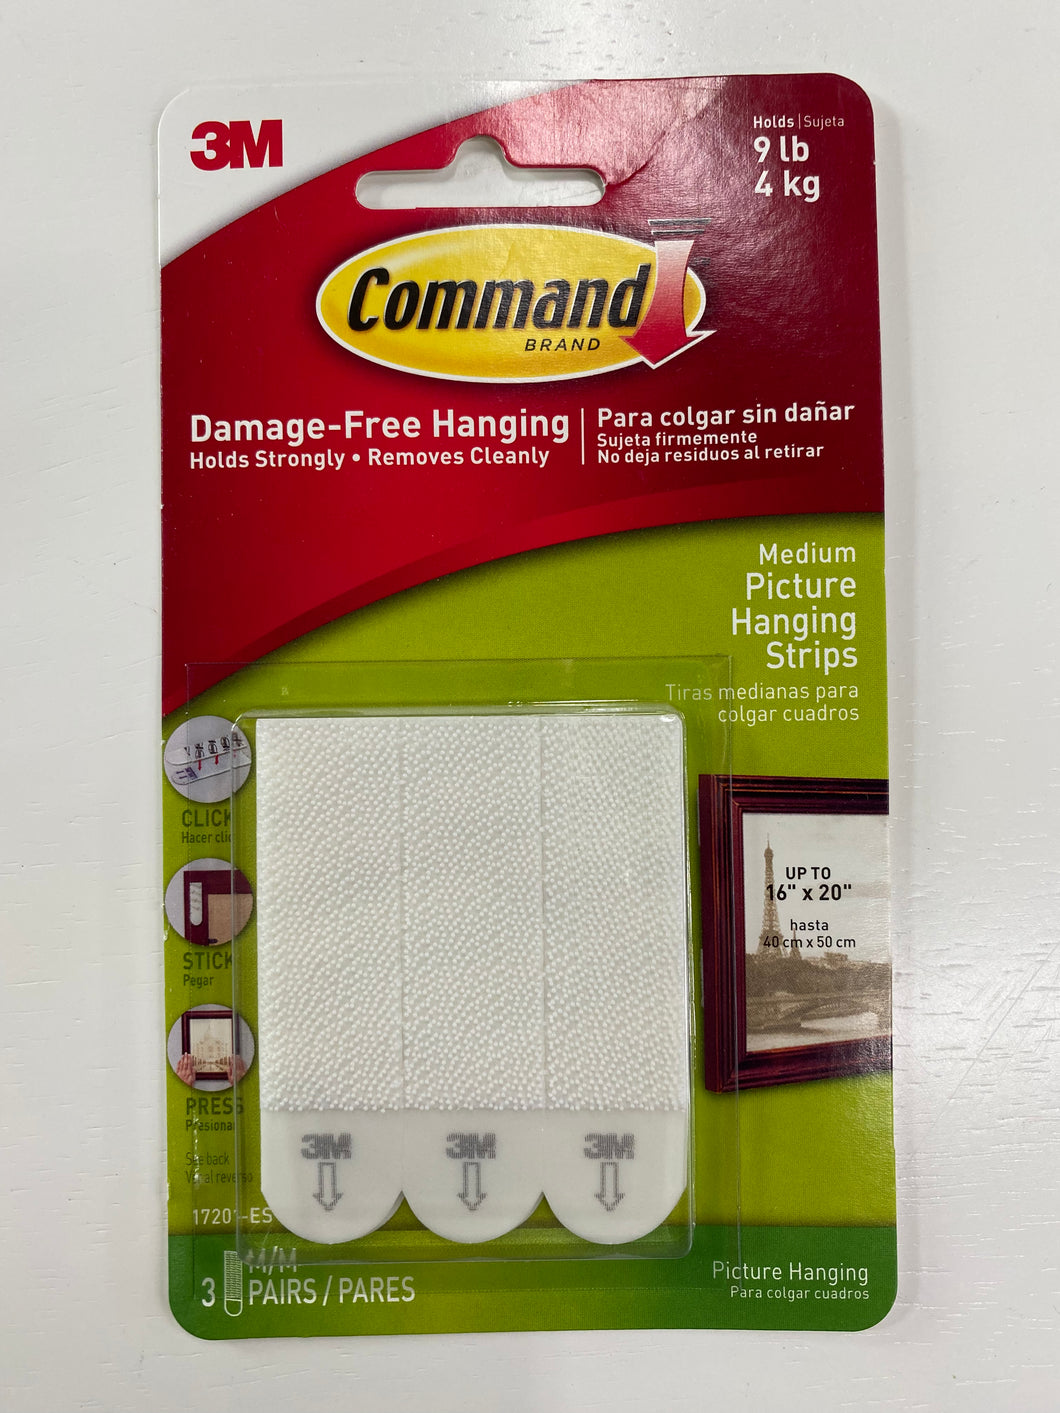 Command Medium Sized Picture Hanging Strips(9lb)- White